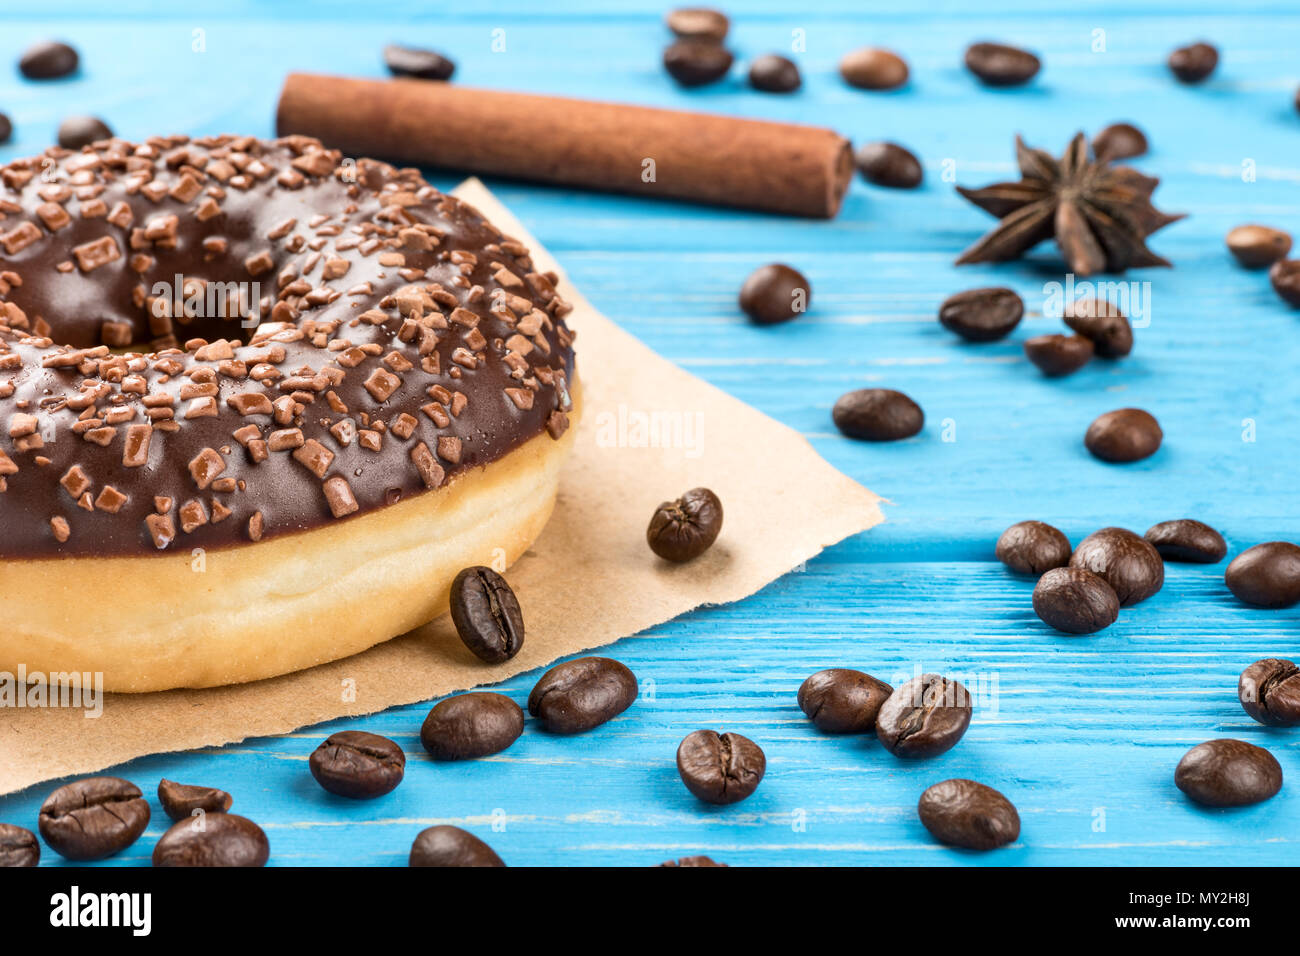 Delicious chocolate donut with scattered beans on the table close-up Stock Photo